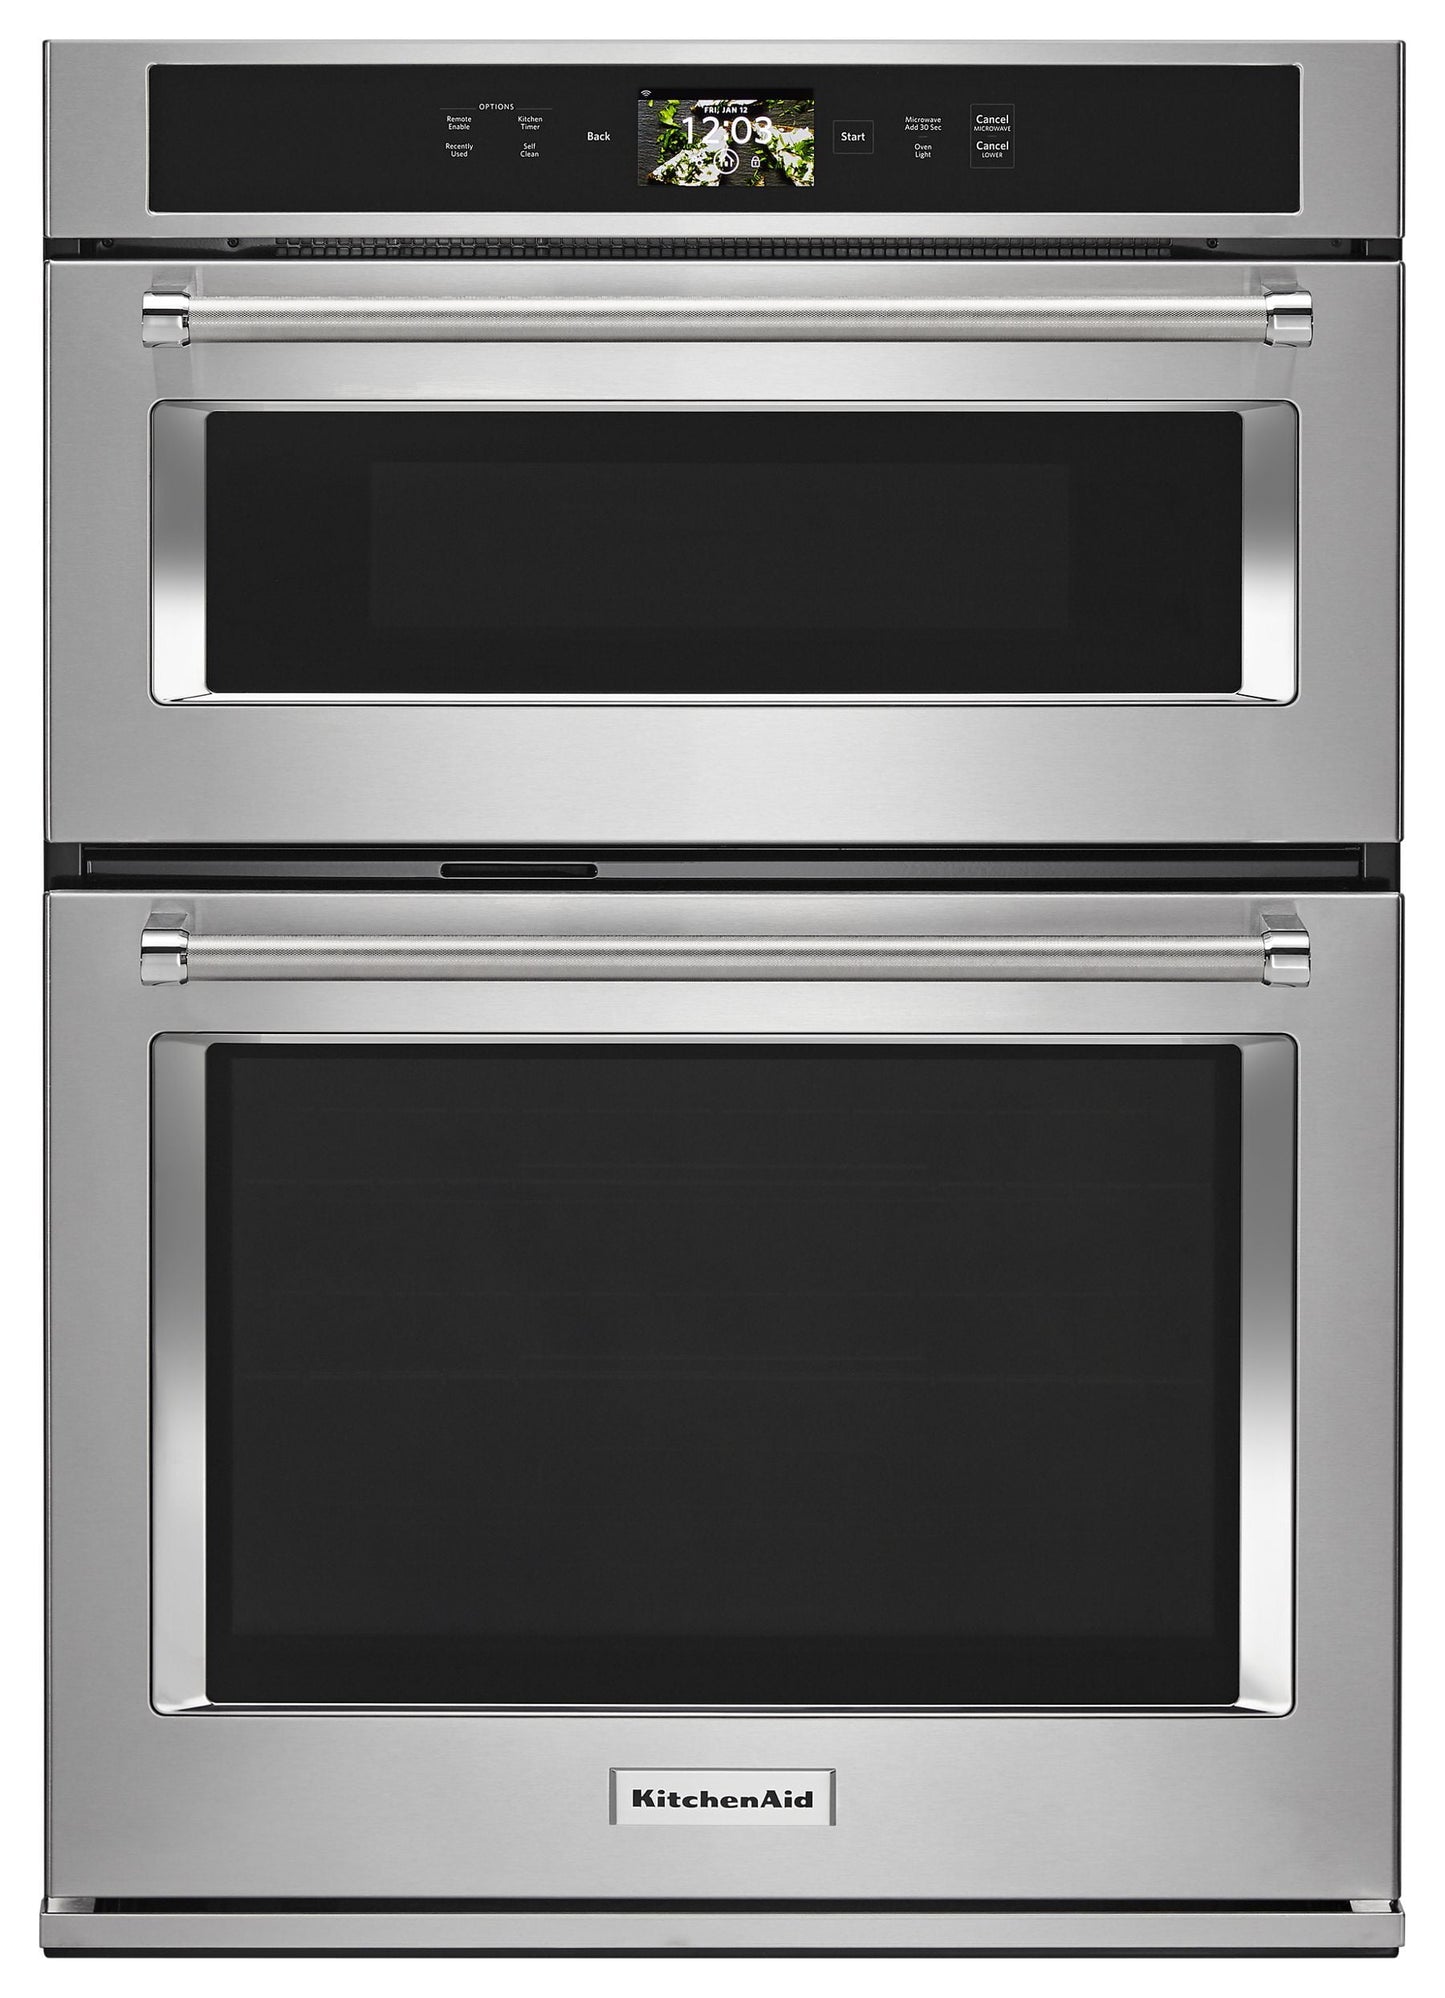 Kitchenaid KOCE900HSS Smart Oven+ 30" Combination Oven With Powered Attachments - Stainless Steel